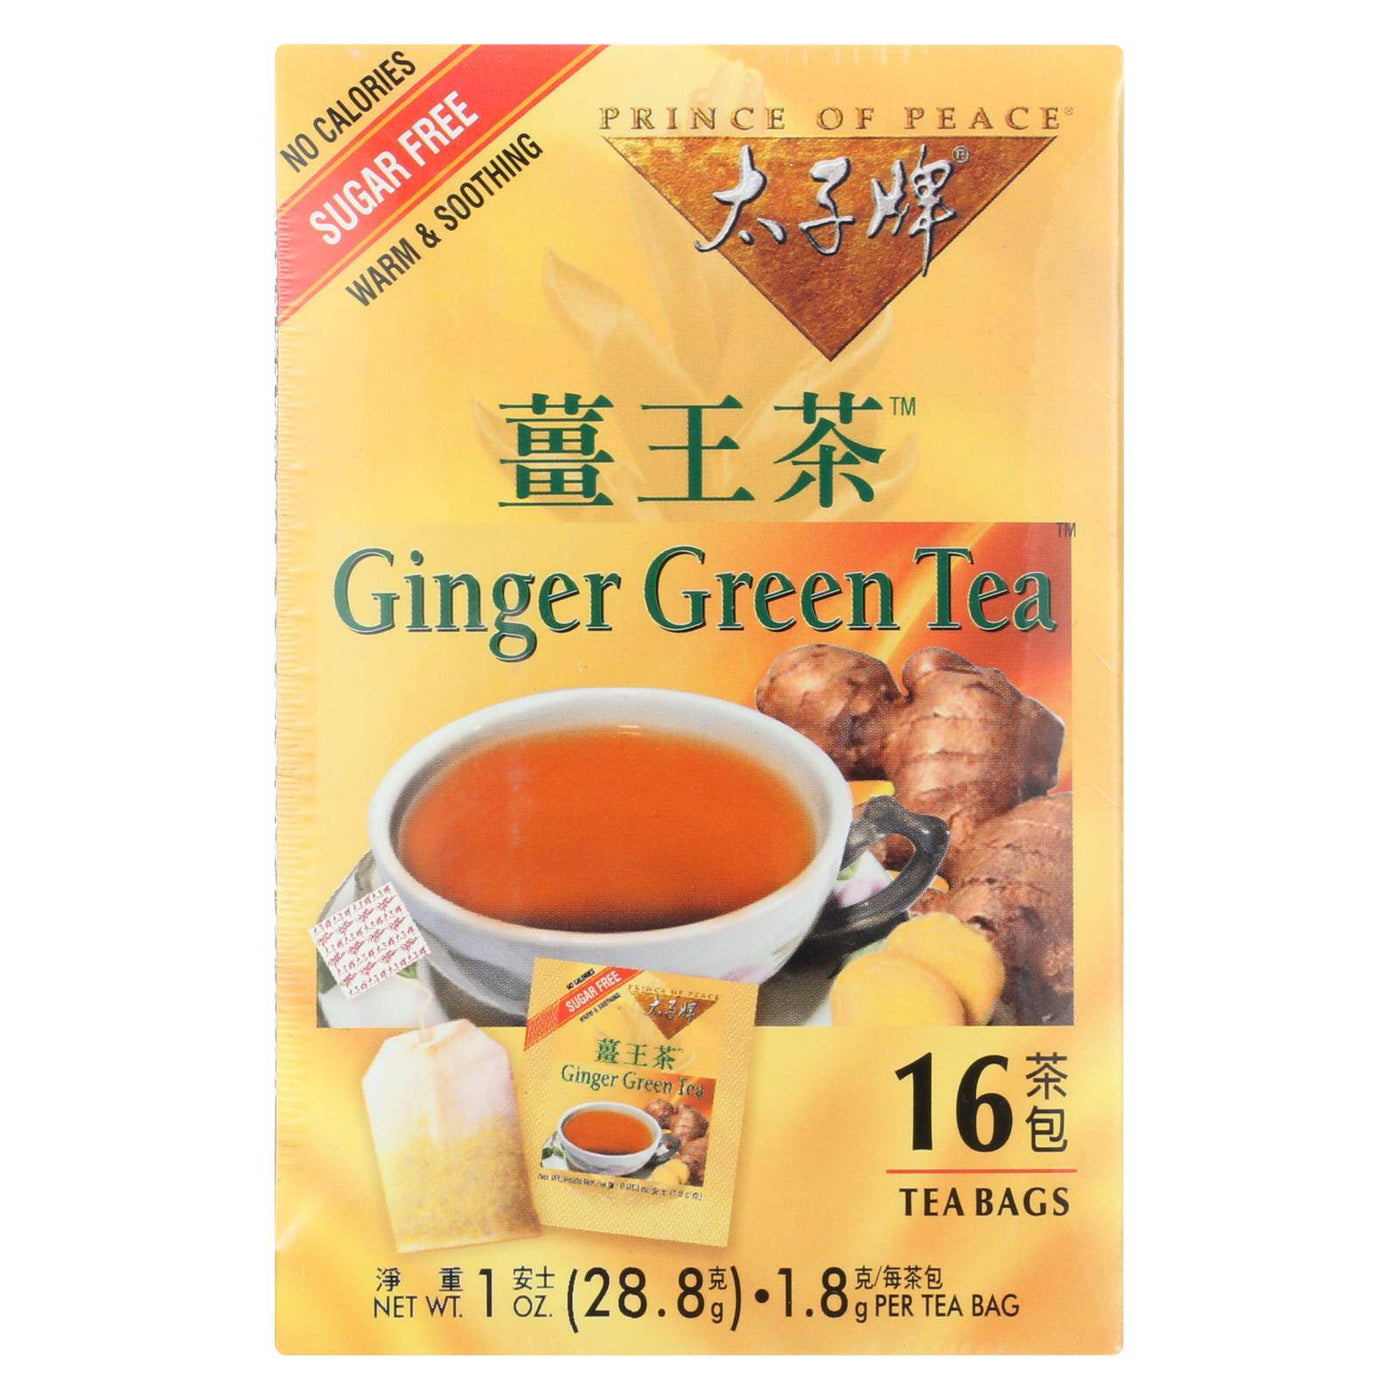 Prince Of Peace Ginger Green Tea - 16 Tea Bags | OnlyNaturals.us